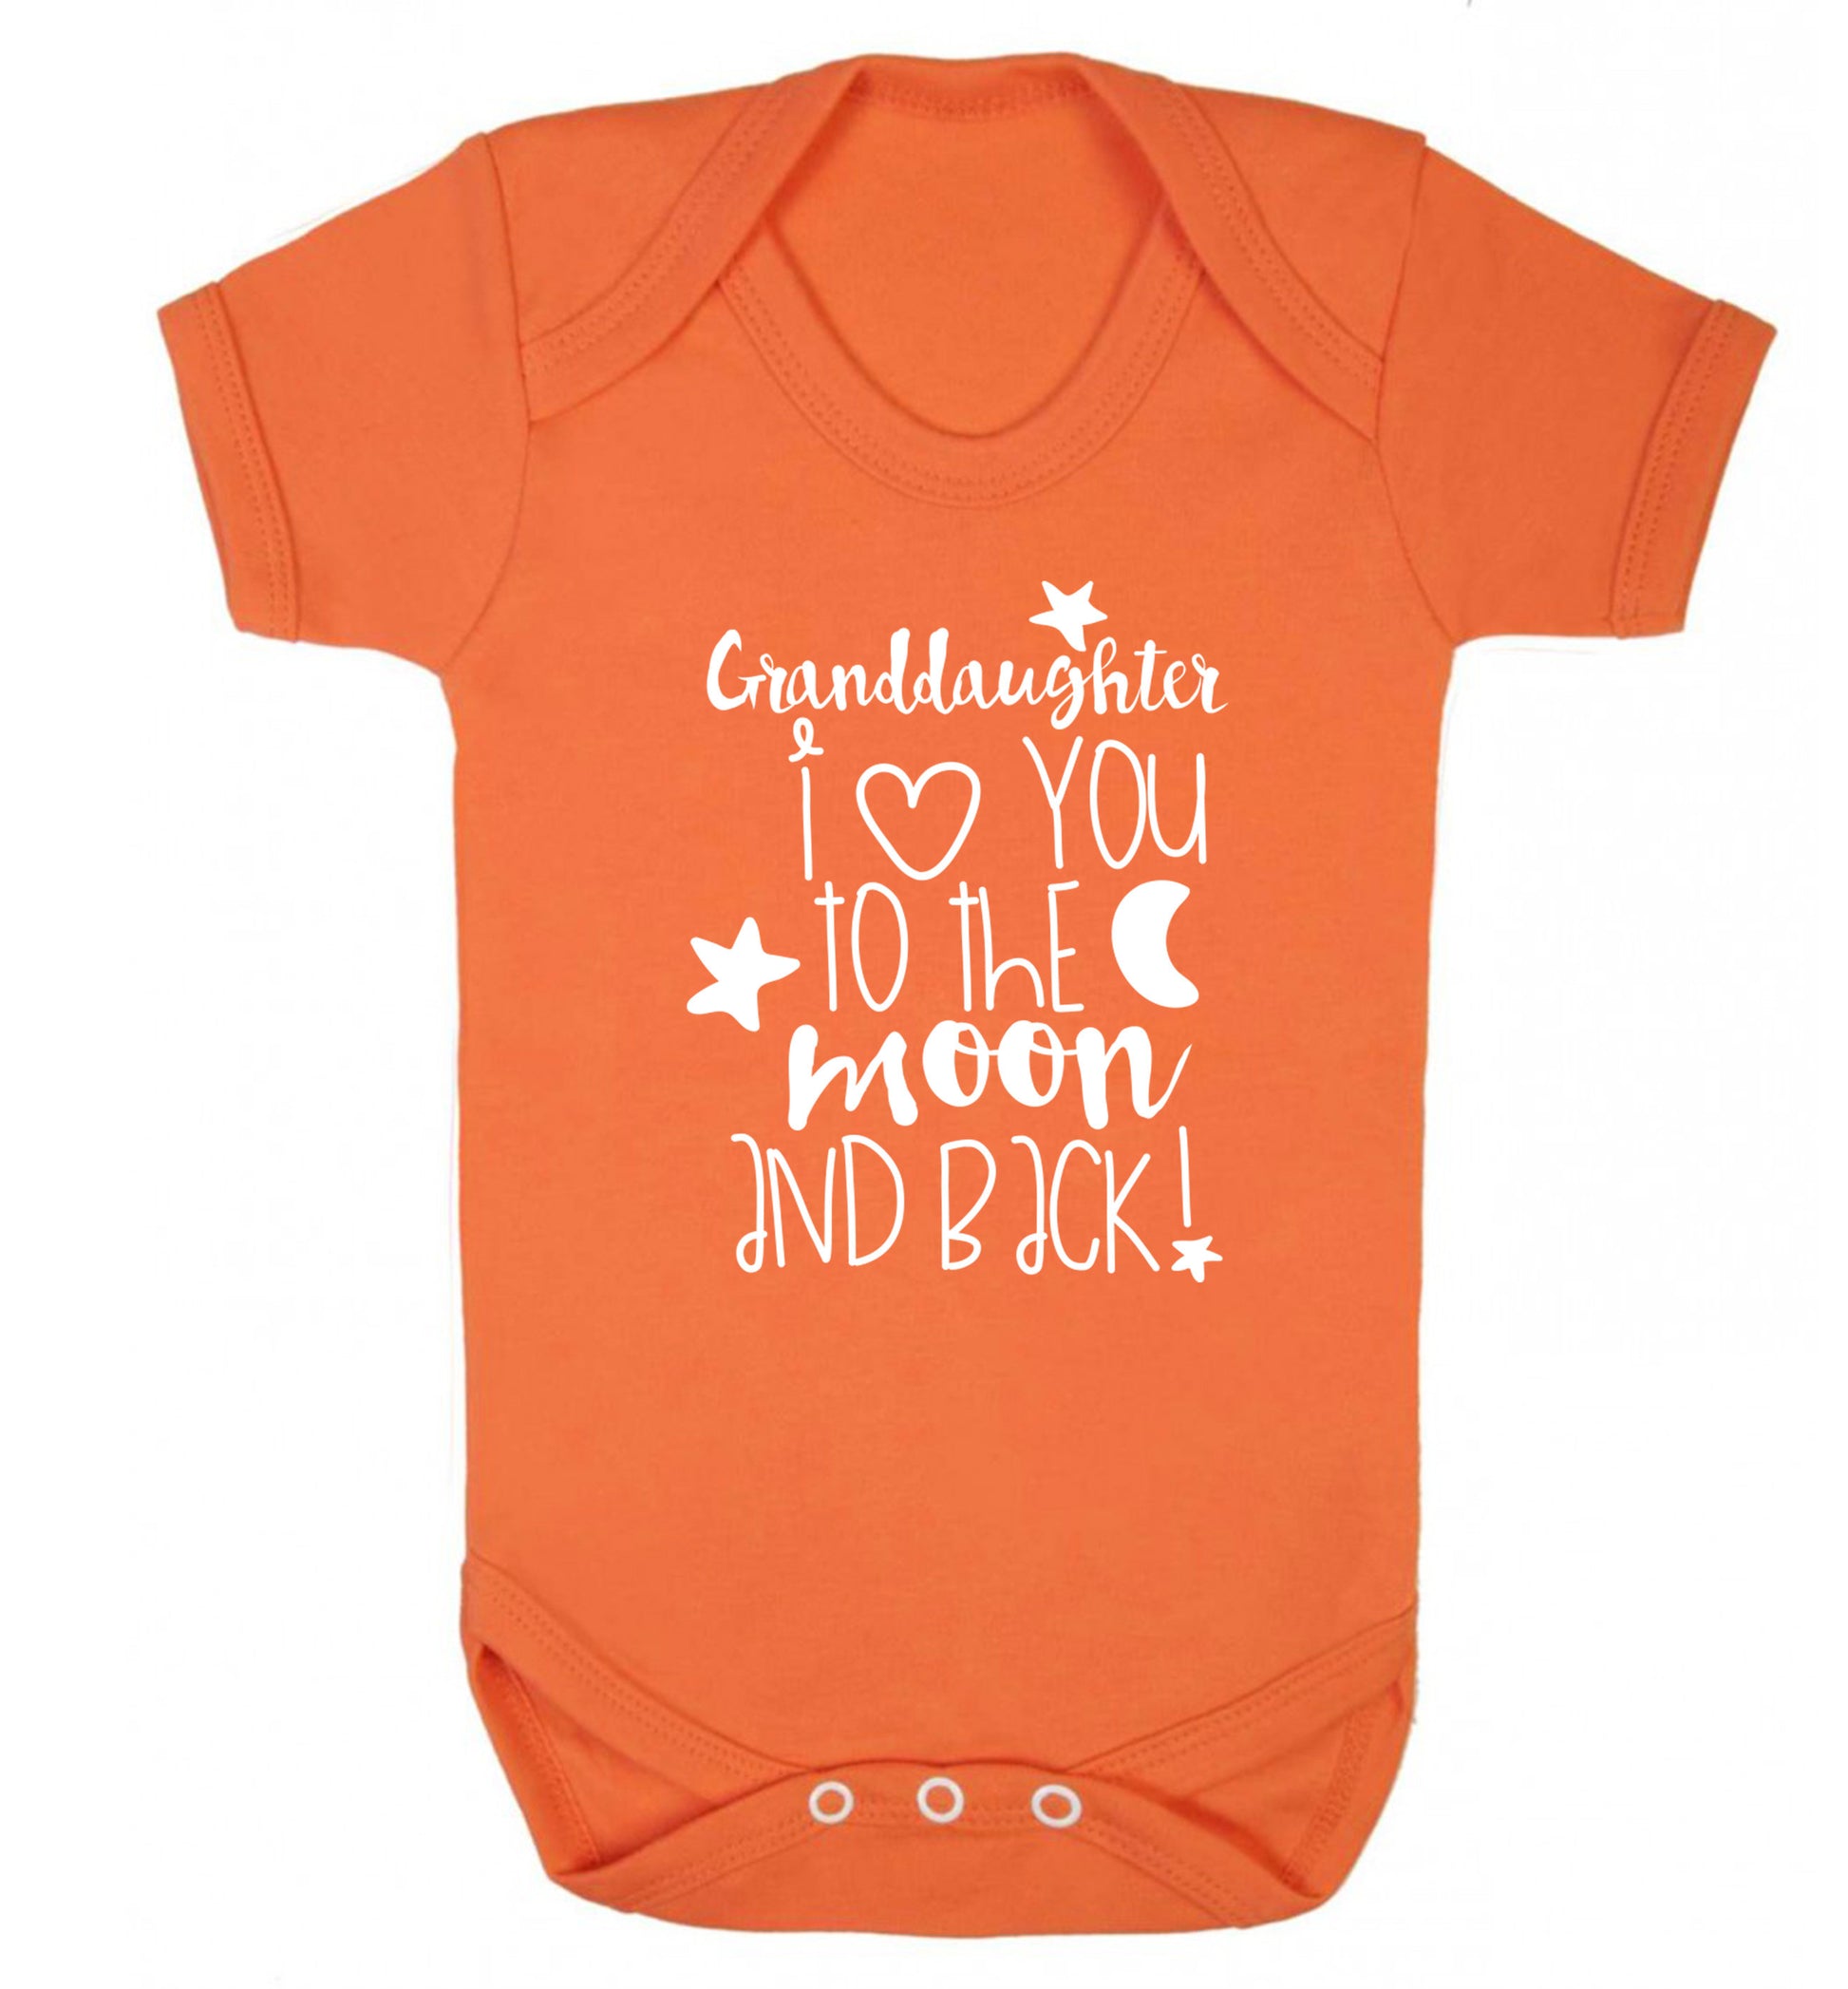 Granddaughter I love you to the moon and back Baby Vest orange 18-24 months